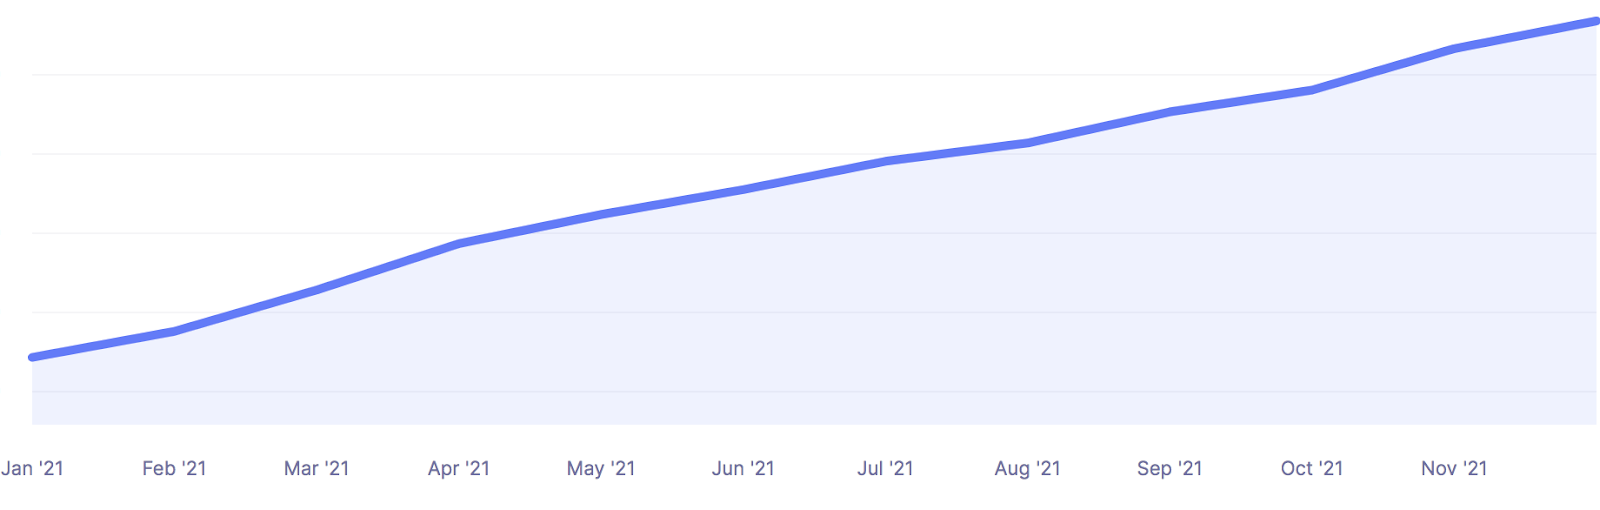 A blue line graph showing Kinsta's steady revenue growth from Jan '21 through Nov '21.